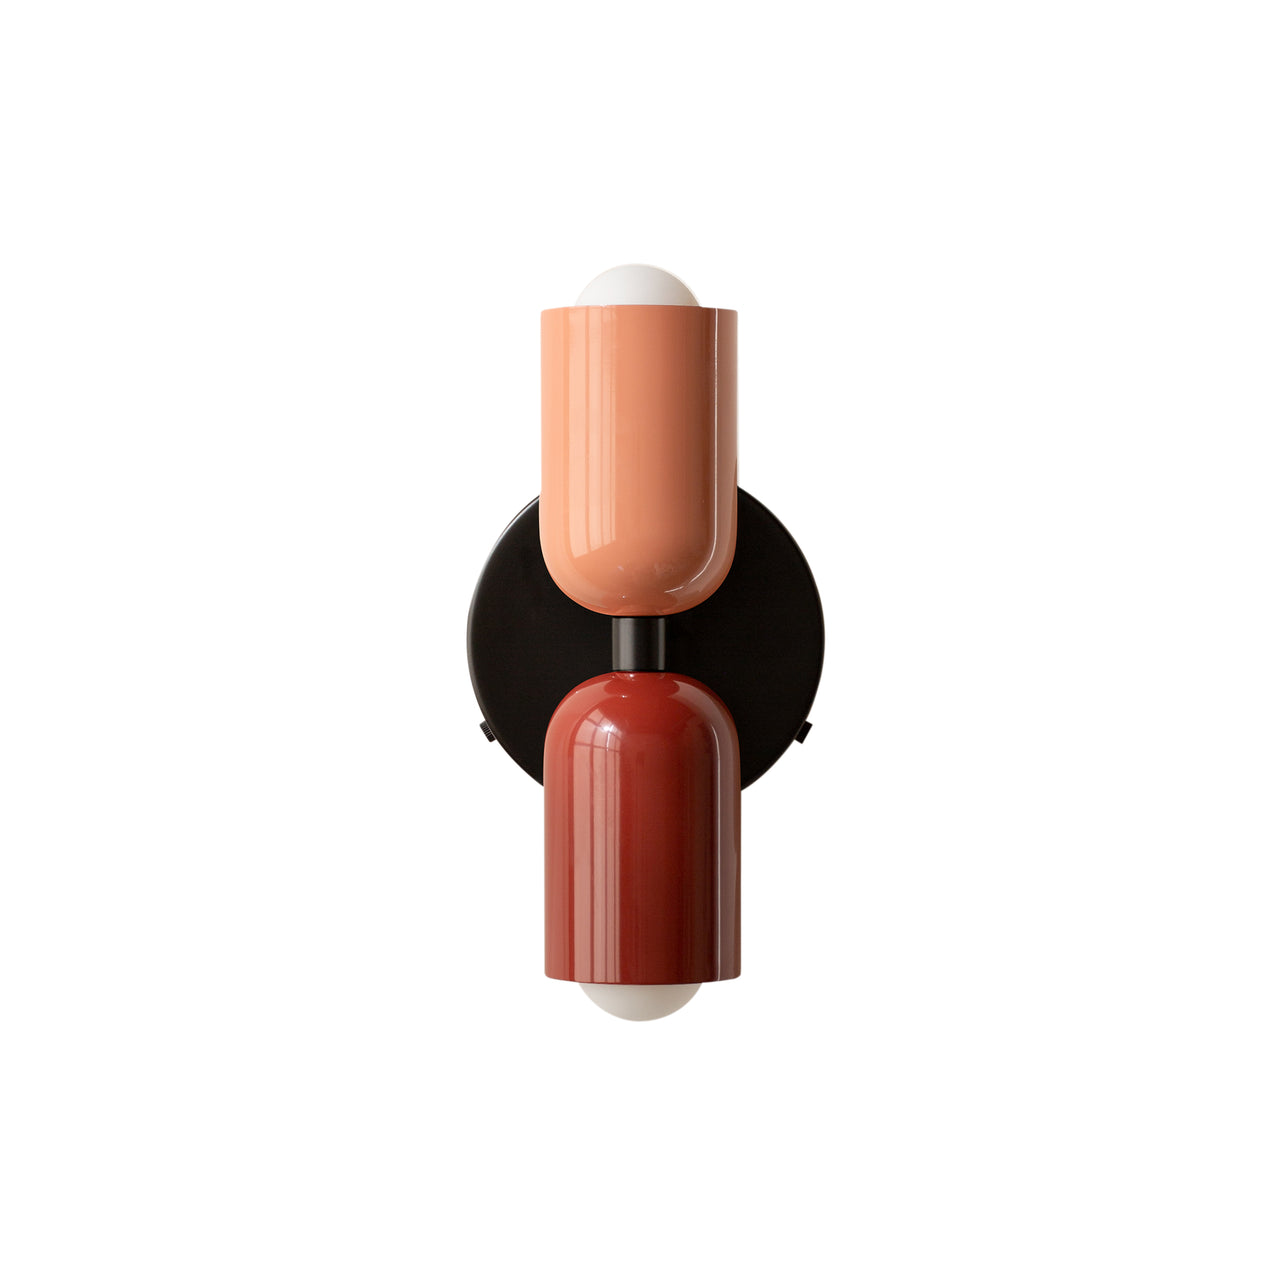 Up Down Sconce: Duo-Tone: + Peach + Oxide Red + Black